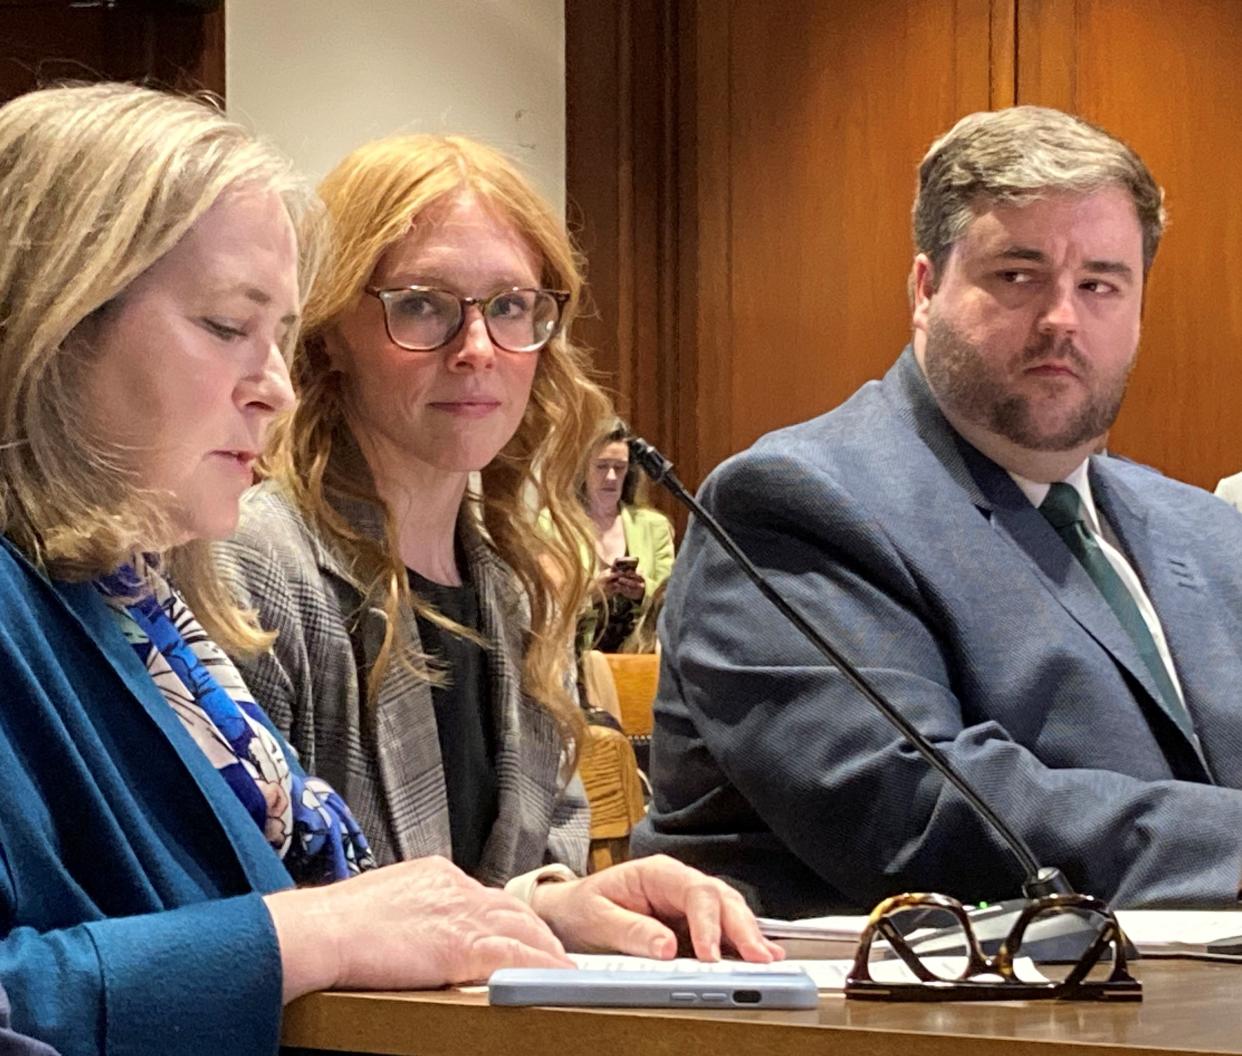 From left, a representative of DoorDash, Katie Franger, public relations manager for Uber, and Brendan Joyce, public policy manager Northeast for Lyft spoke at the special Joint Committee hearing on the proposed ballot initiatives; focusing on six related questions that would determine the status of rideshare drivers working for app-based technological companies.